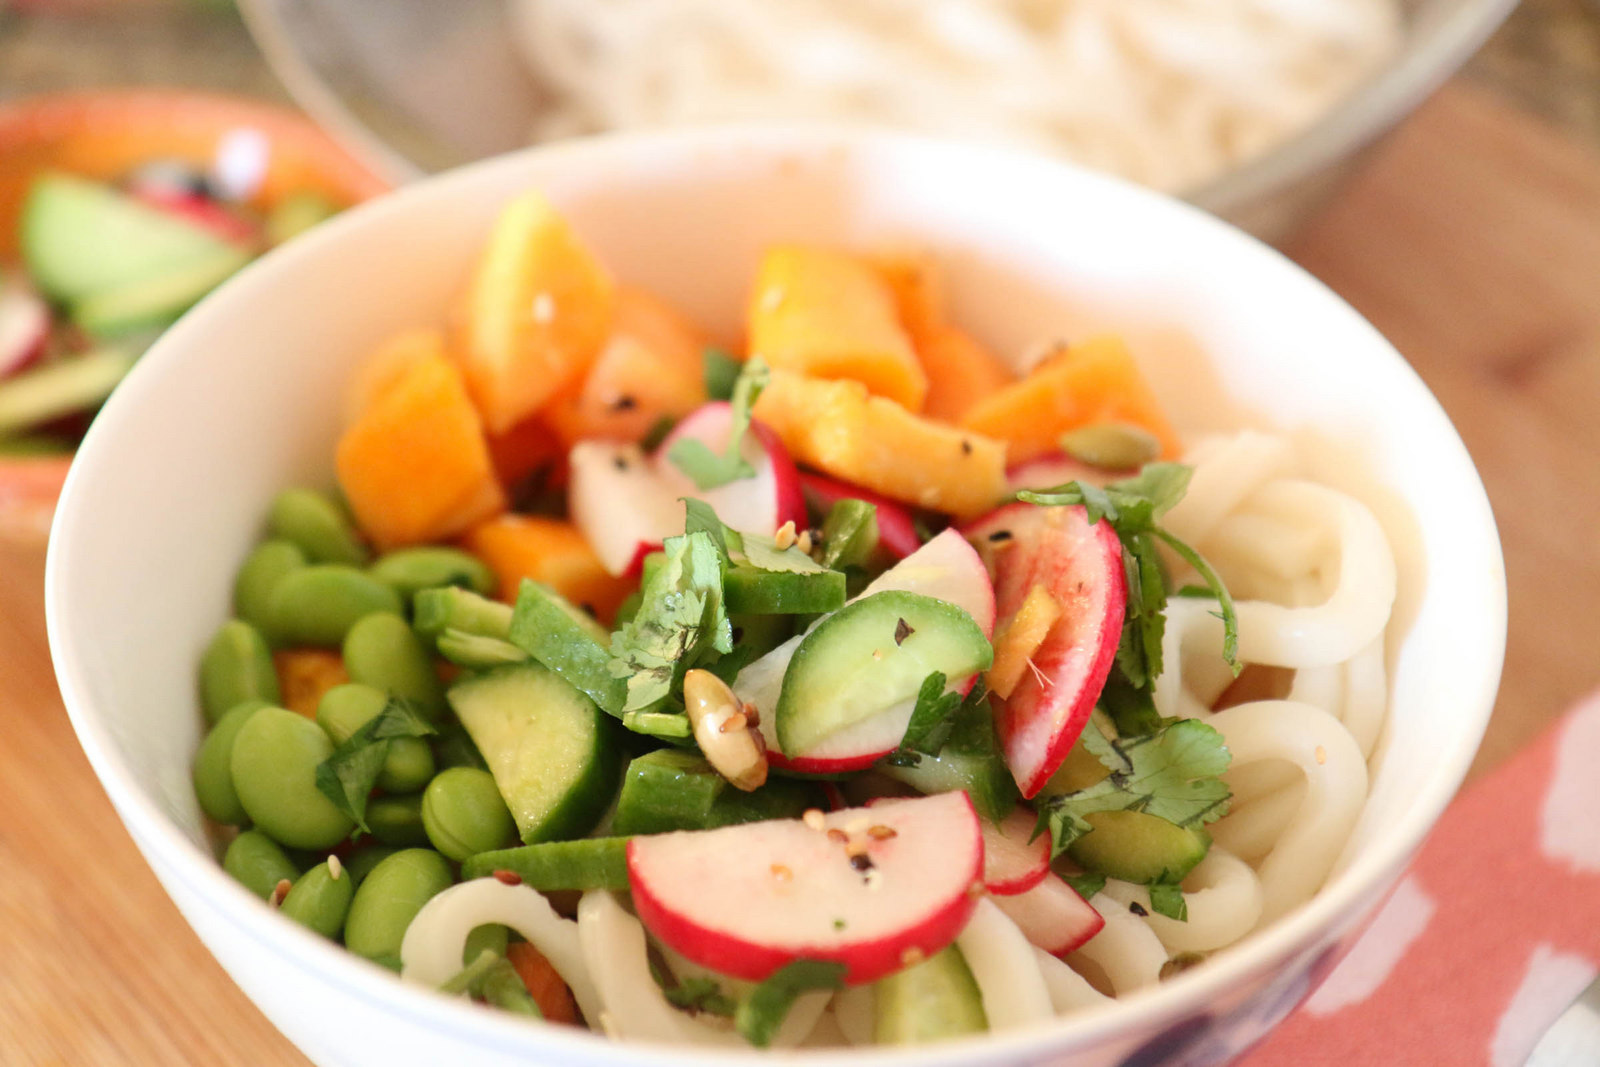 Udon noodle salad with roasted butternut squash